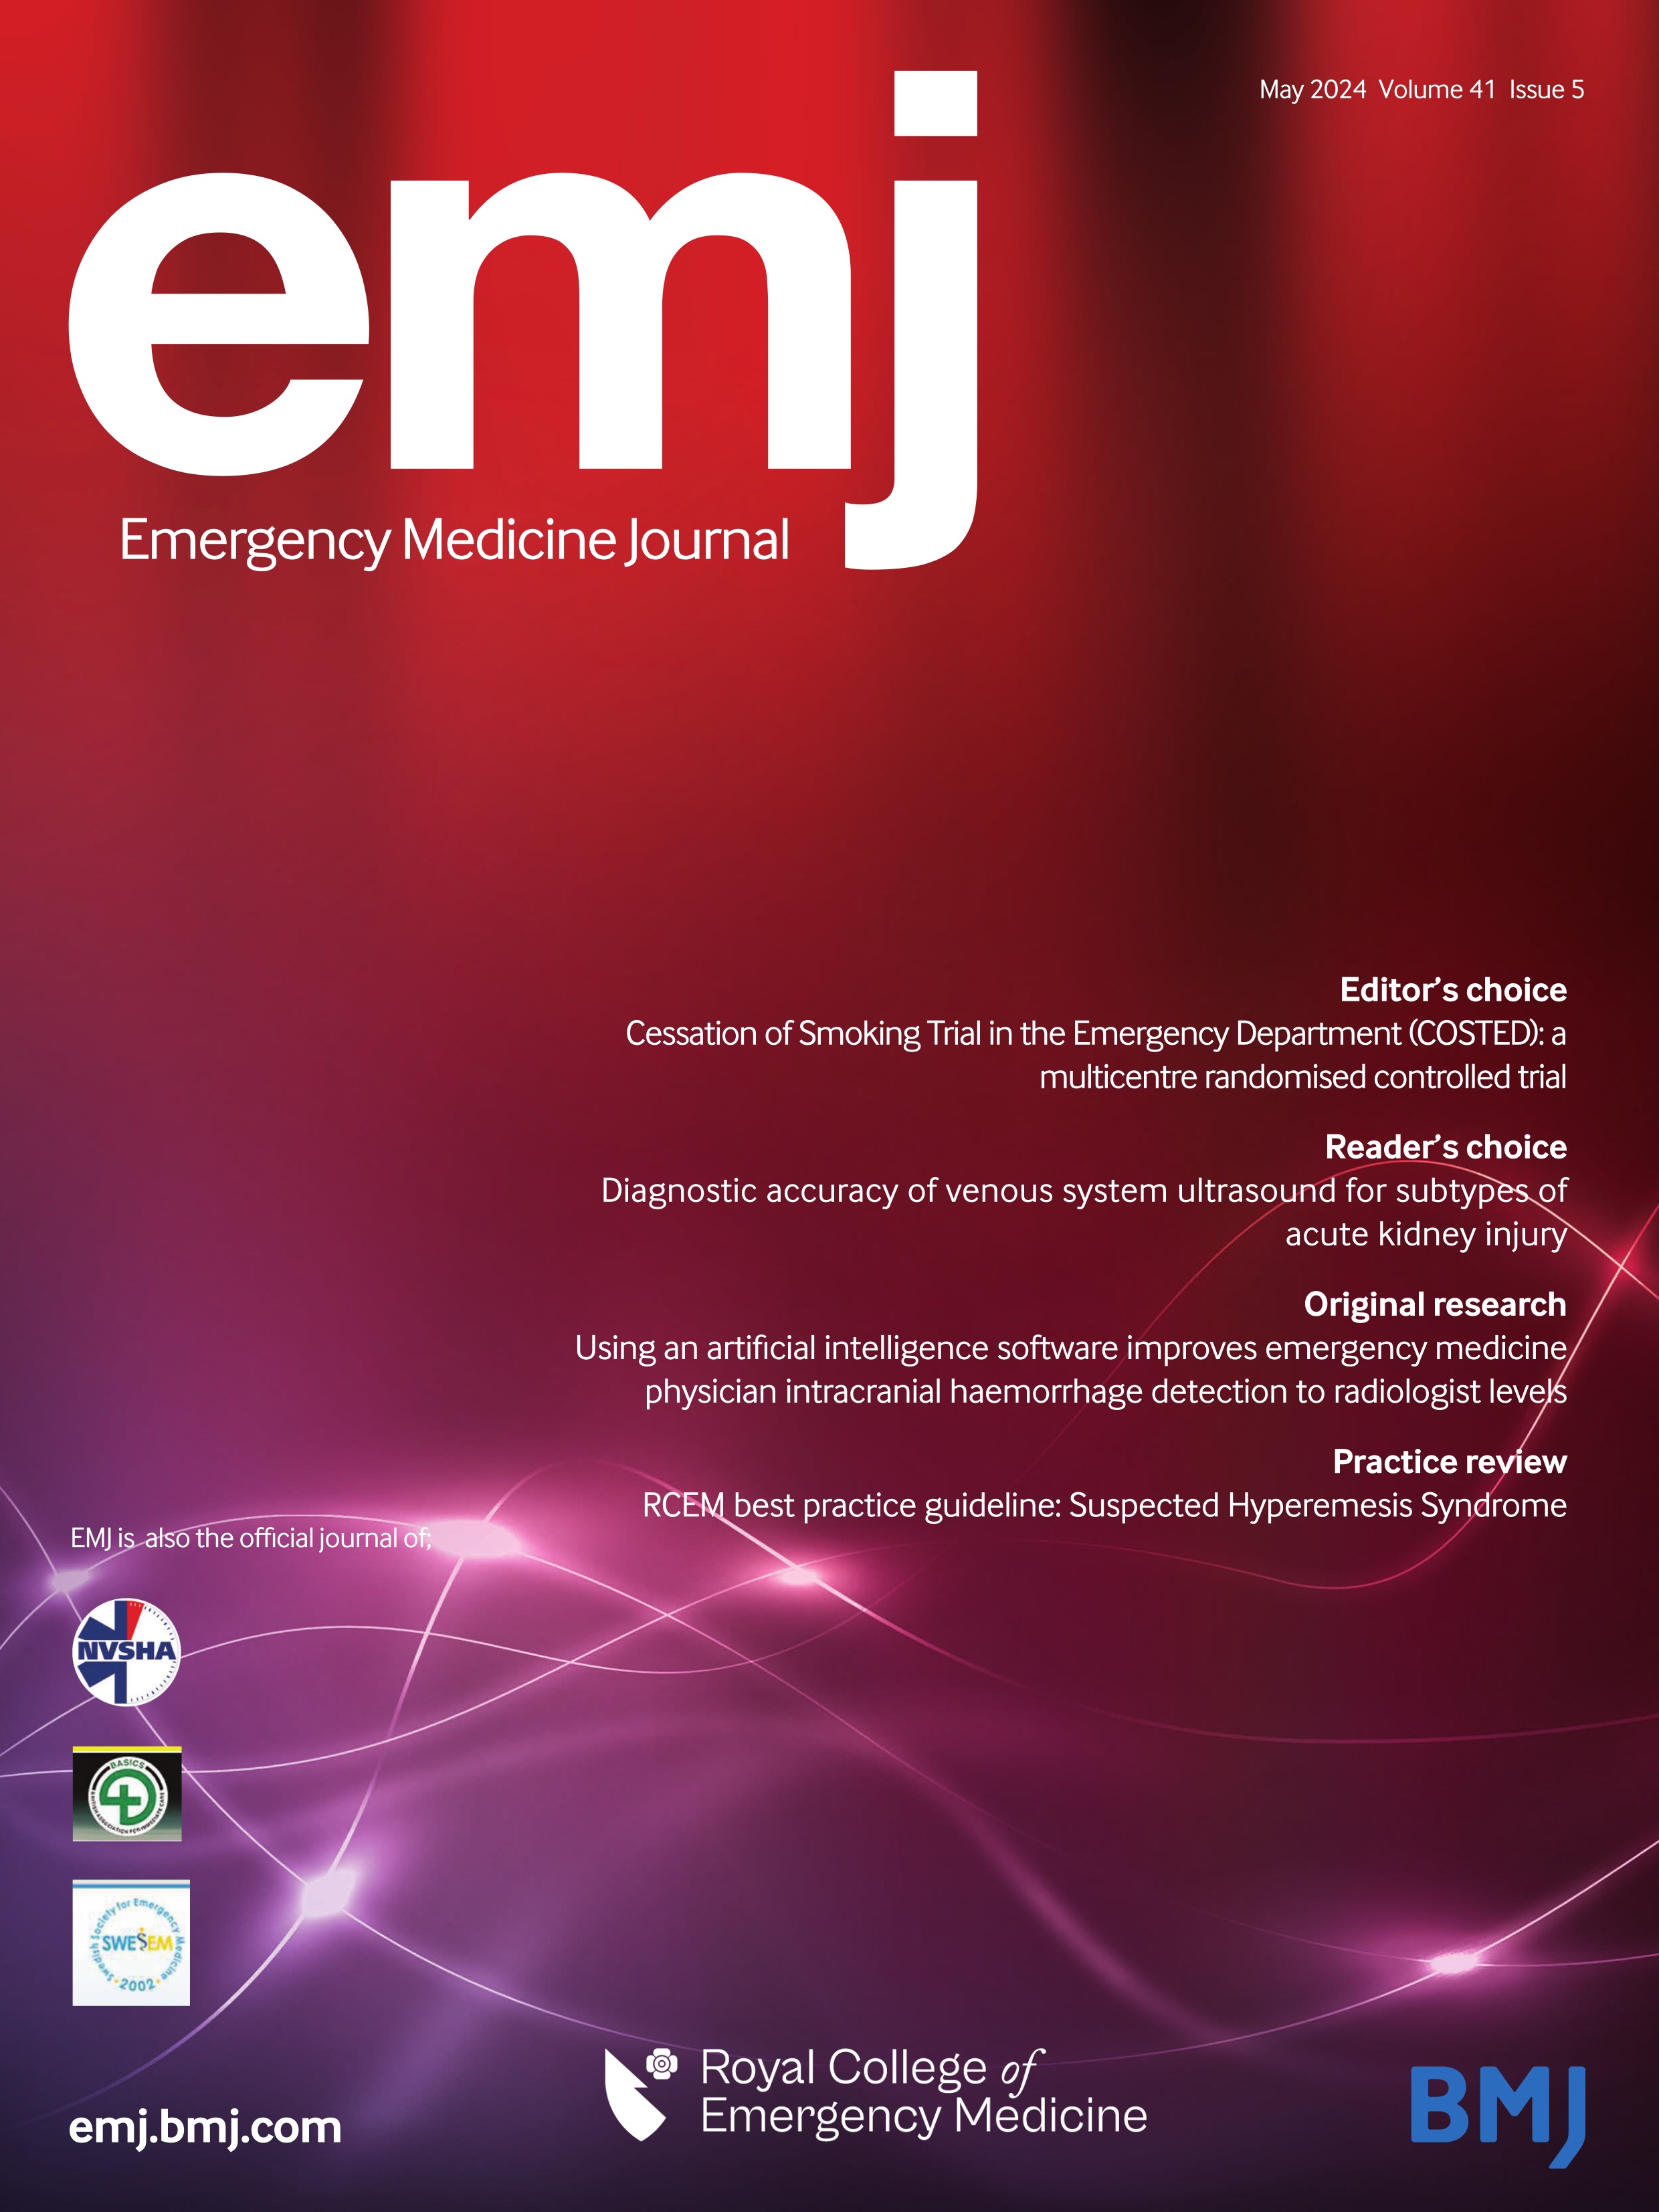 Opportunistic screening in the emergency department